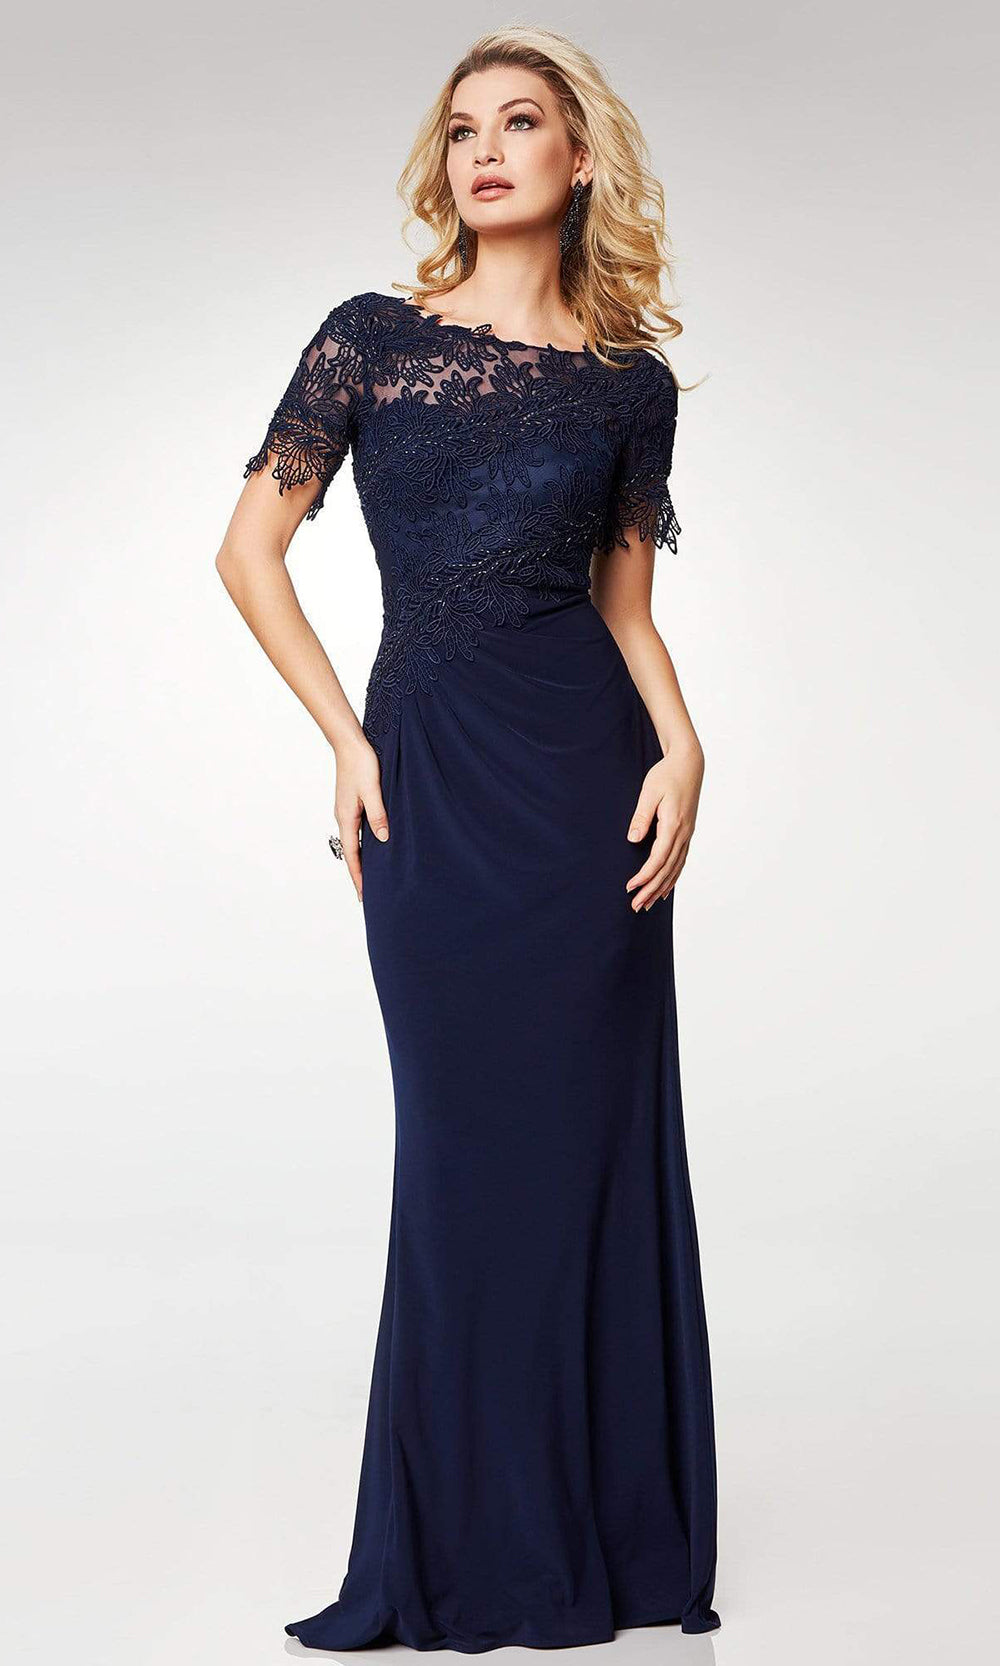 Clarisse - Short Sleeve Lace Chiffon Trumpet Dress M6517 - 1 pc Navy In Size 20 Available CCSALE 20 / Navy